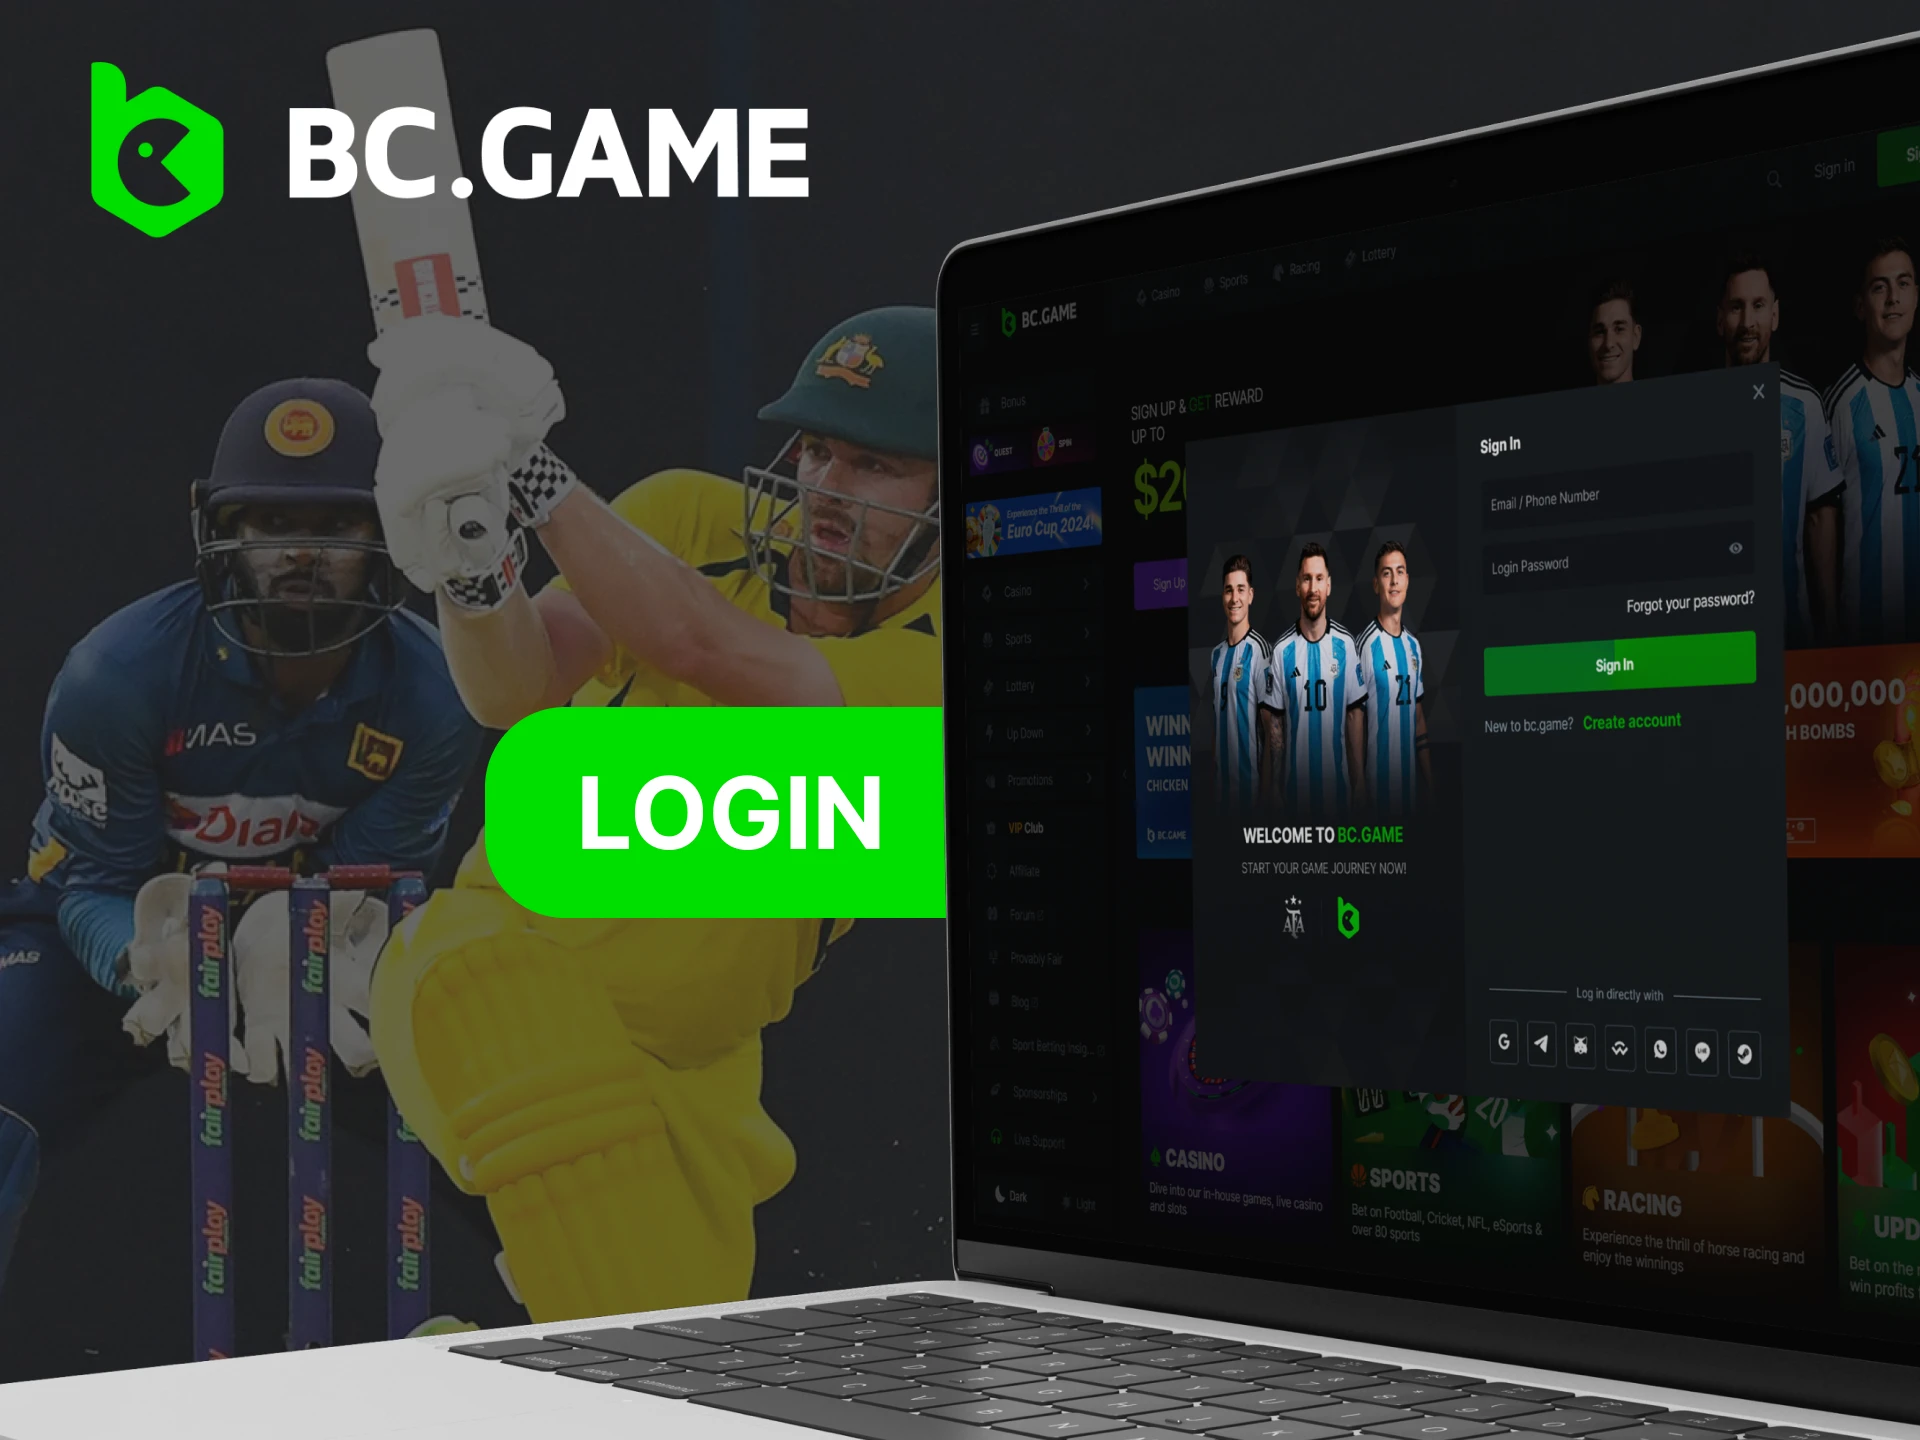 If you already have a BC Game account, just log in.